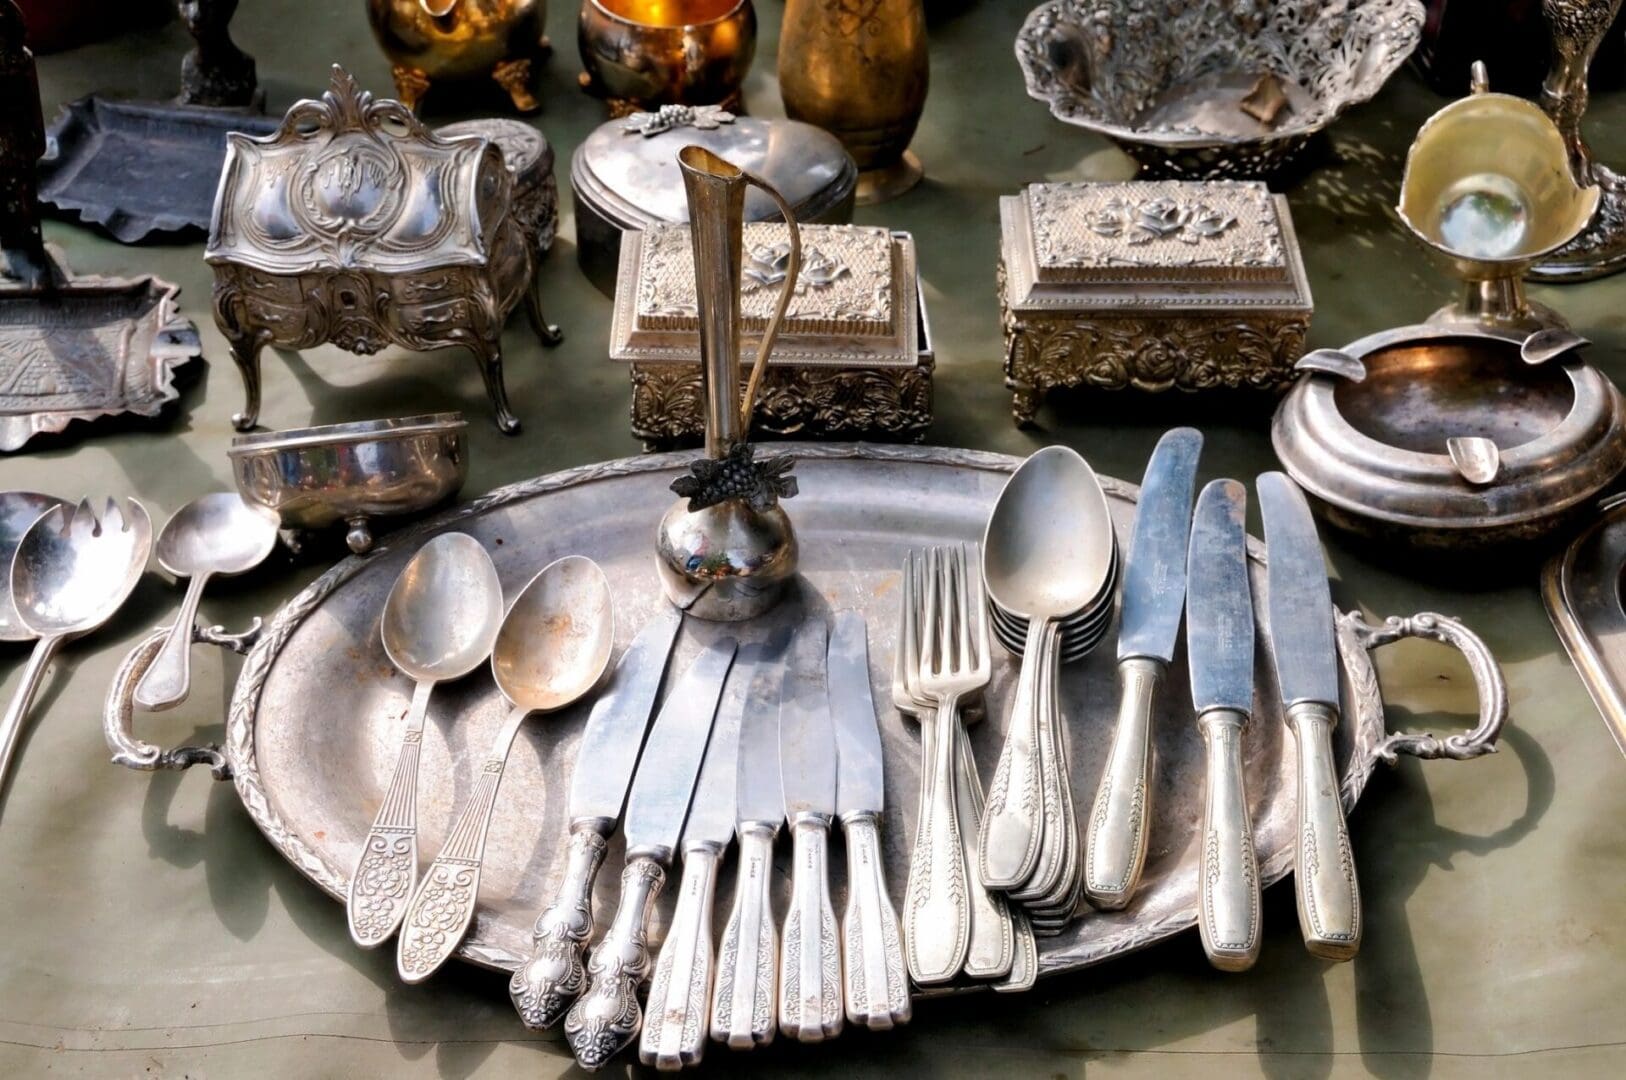 A table with silverware and other items on it.